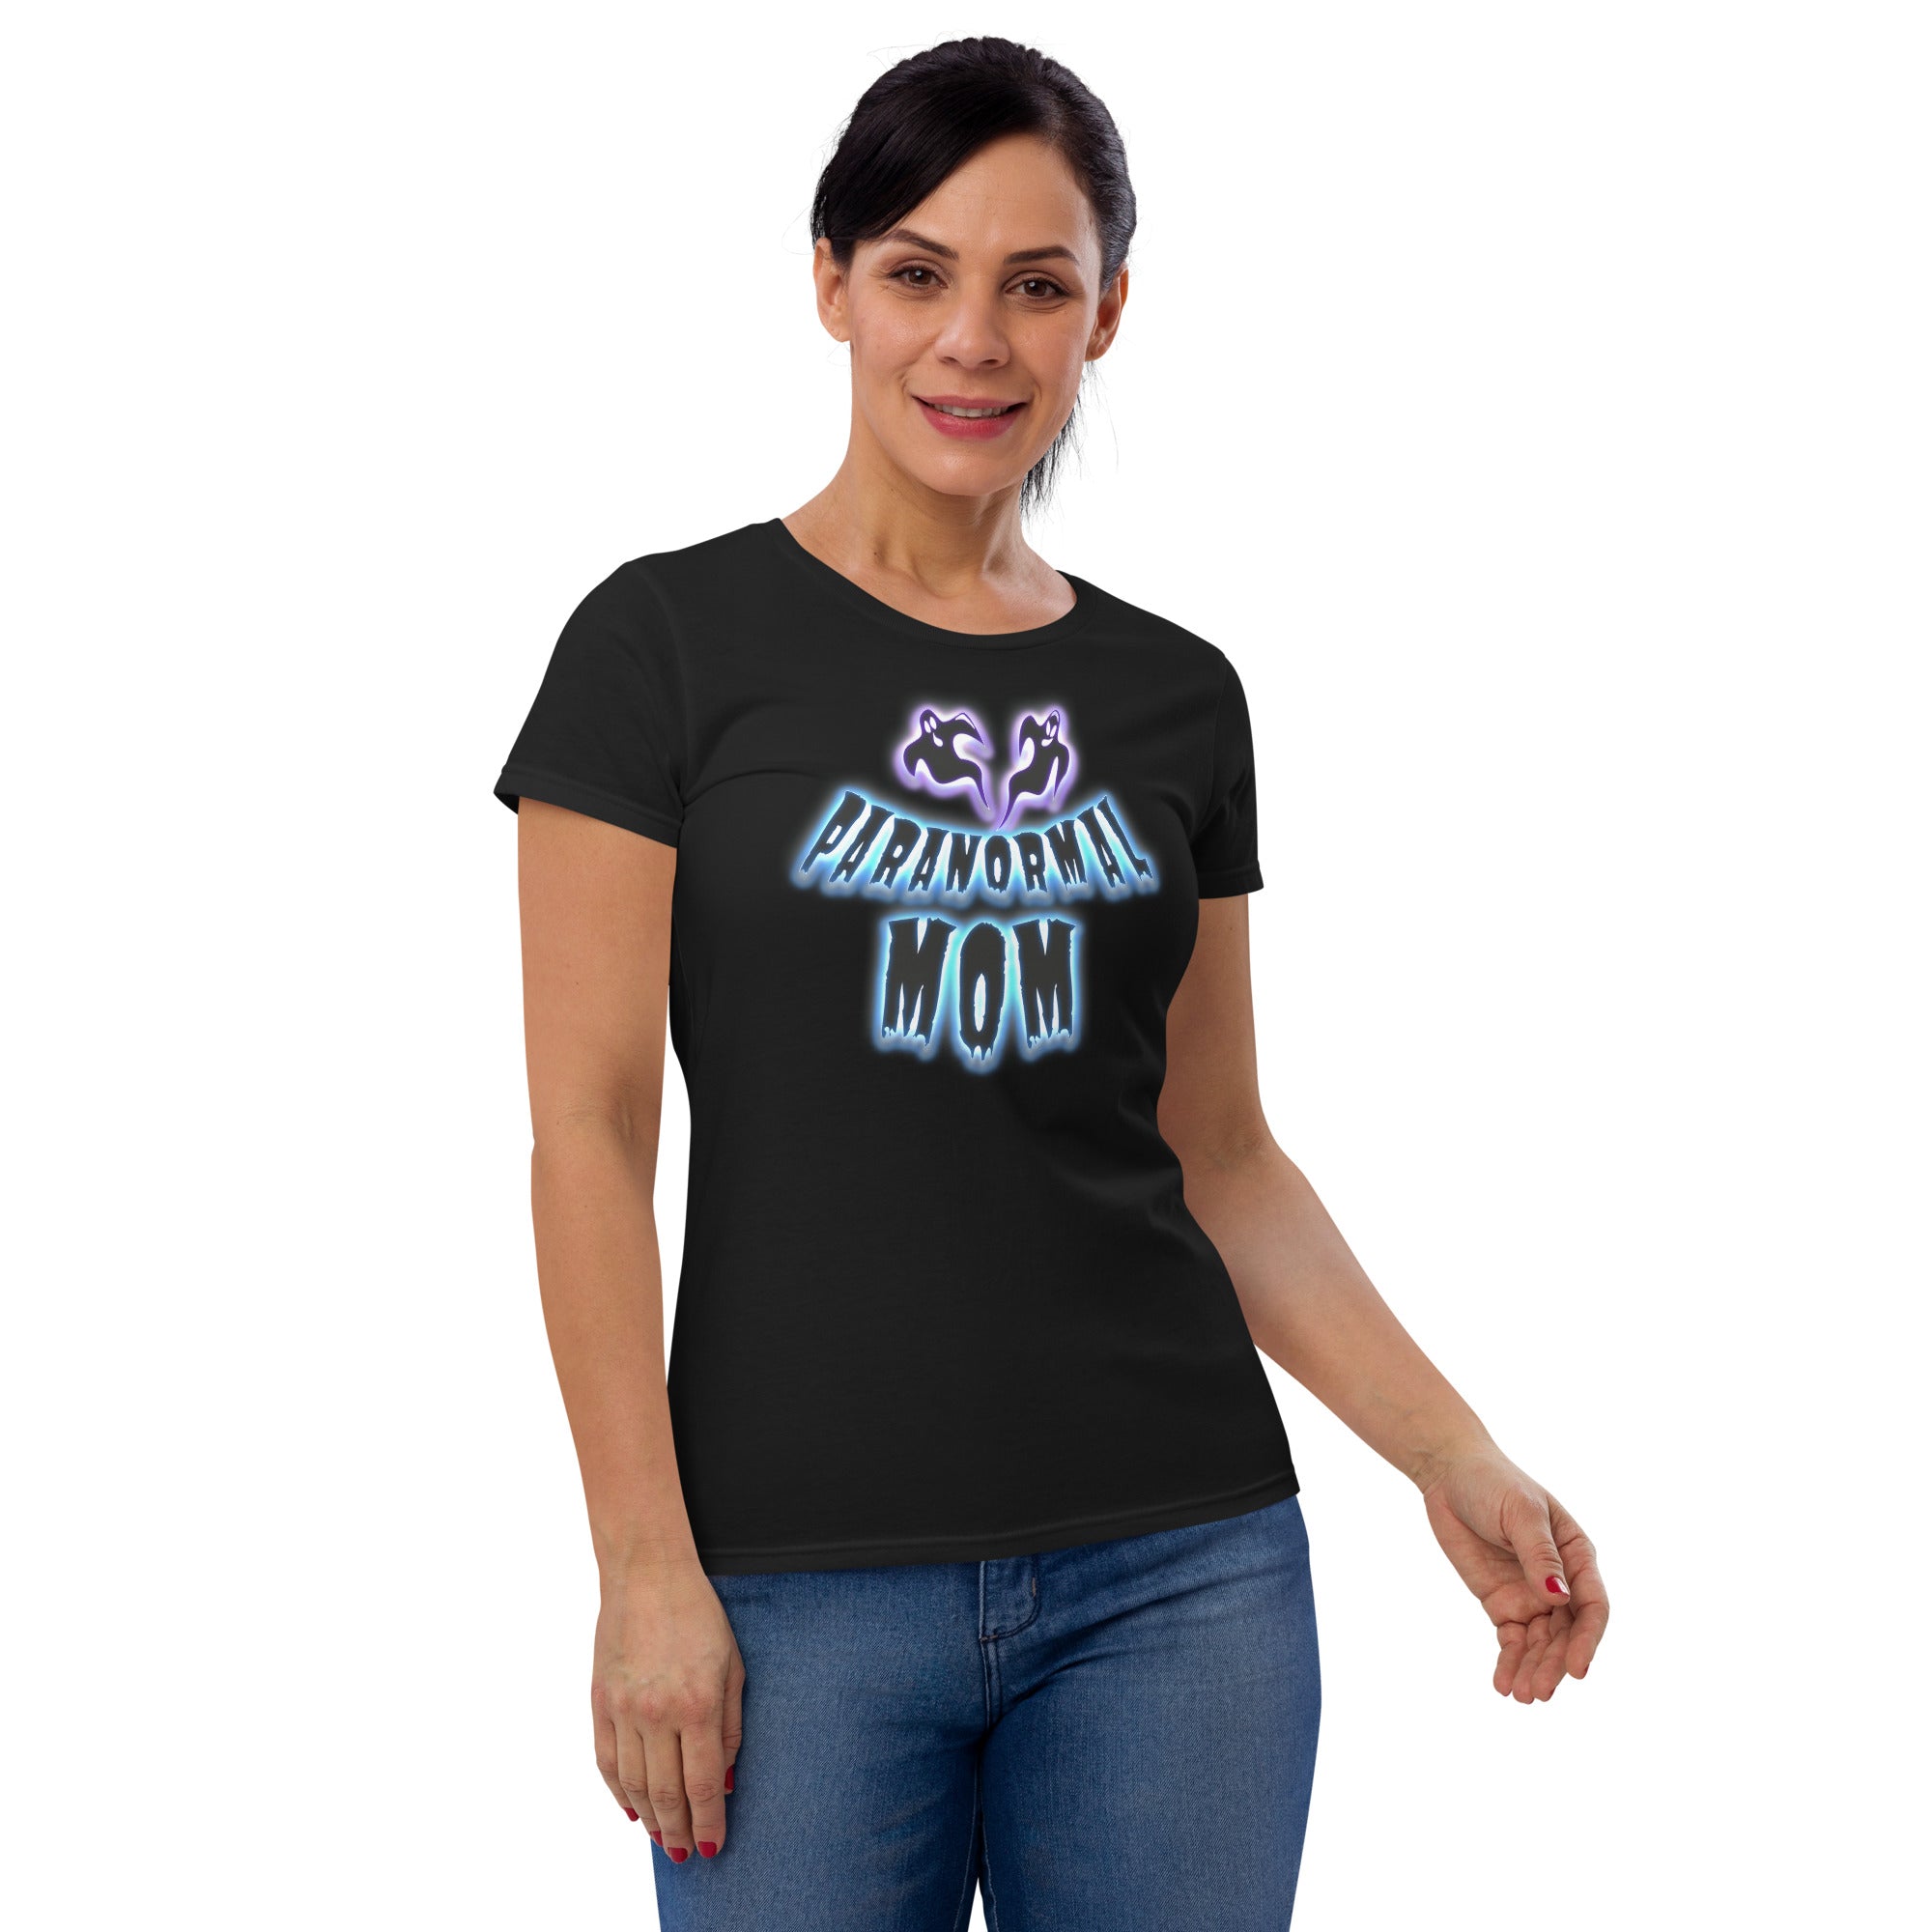 Paranormal Ghost Mom Poltergeist Mother's Day Women's Short Sleeve Babydoll T-shirt